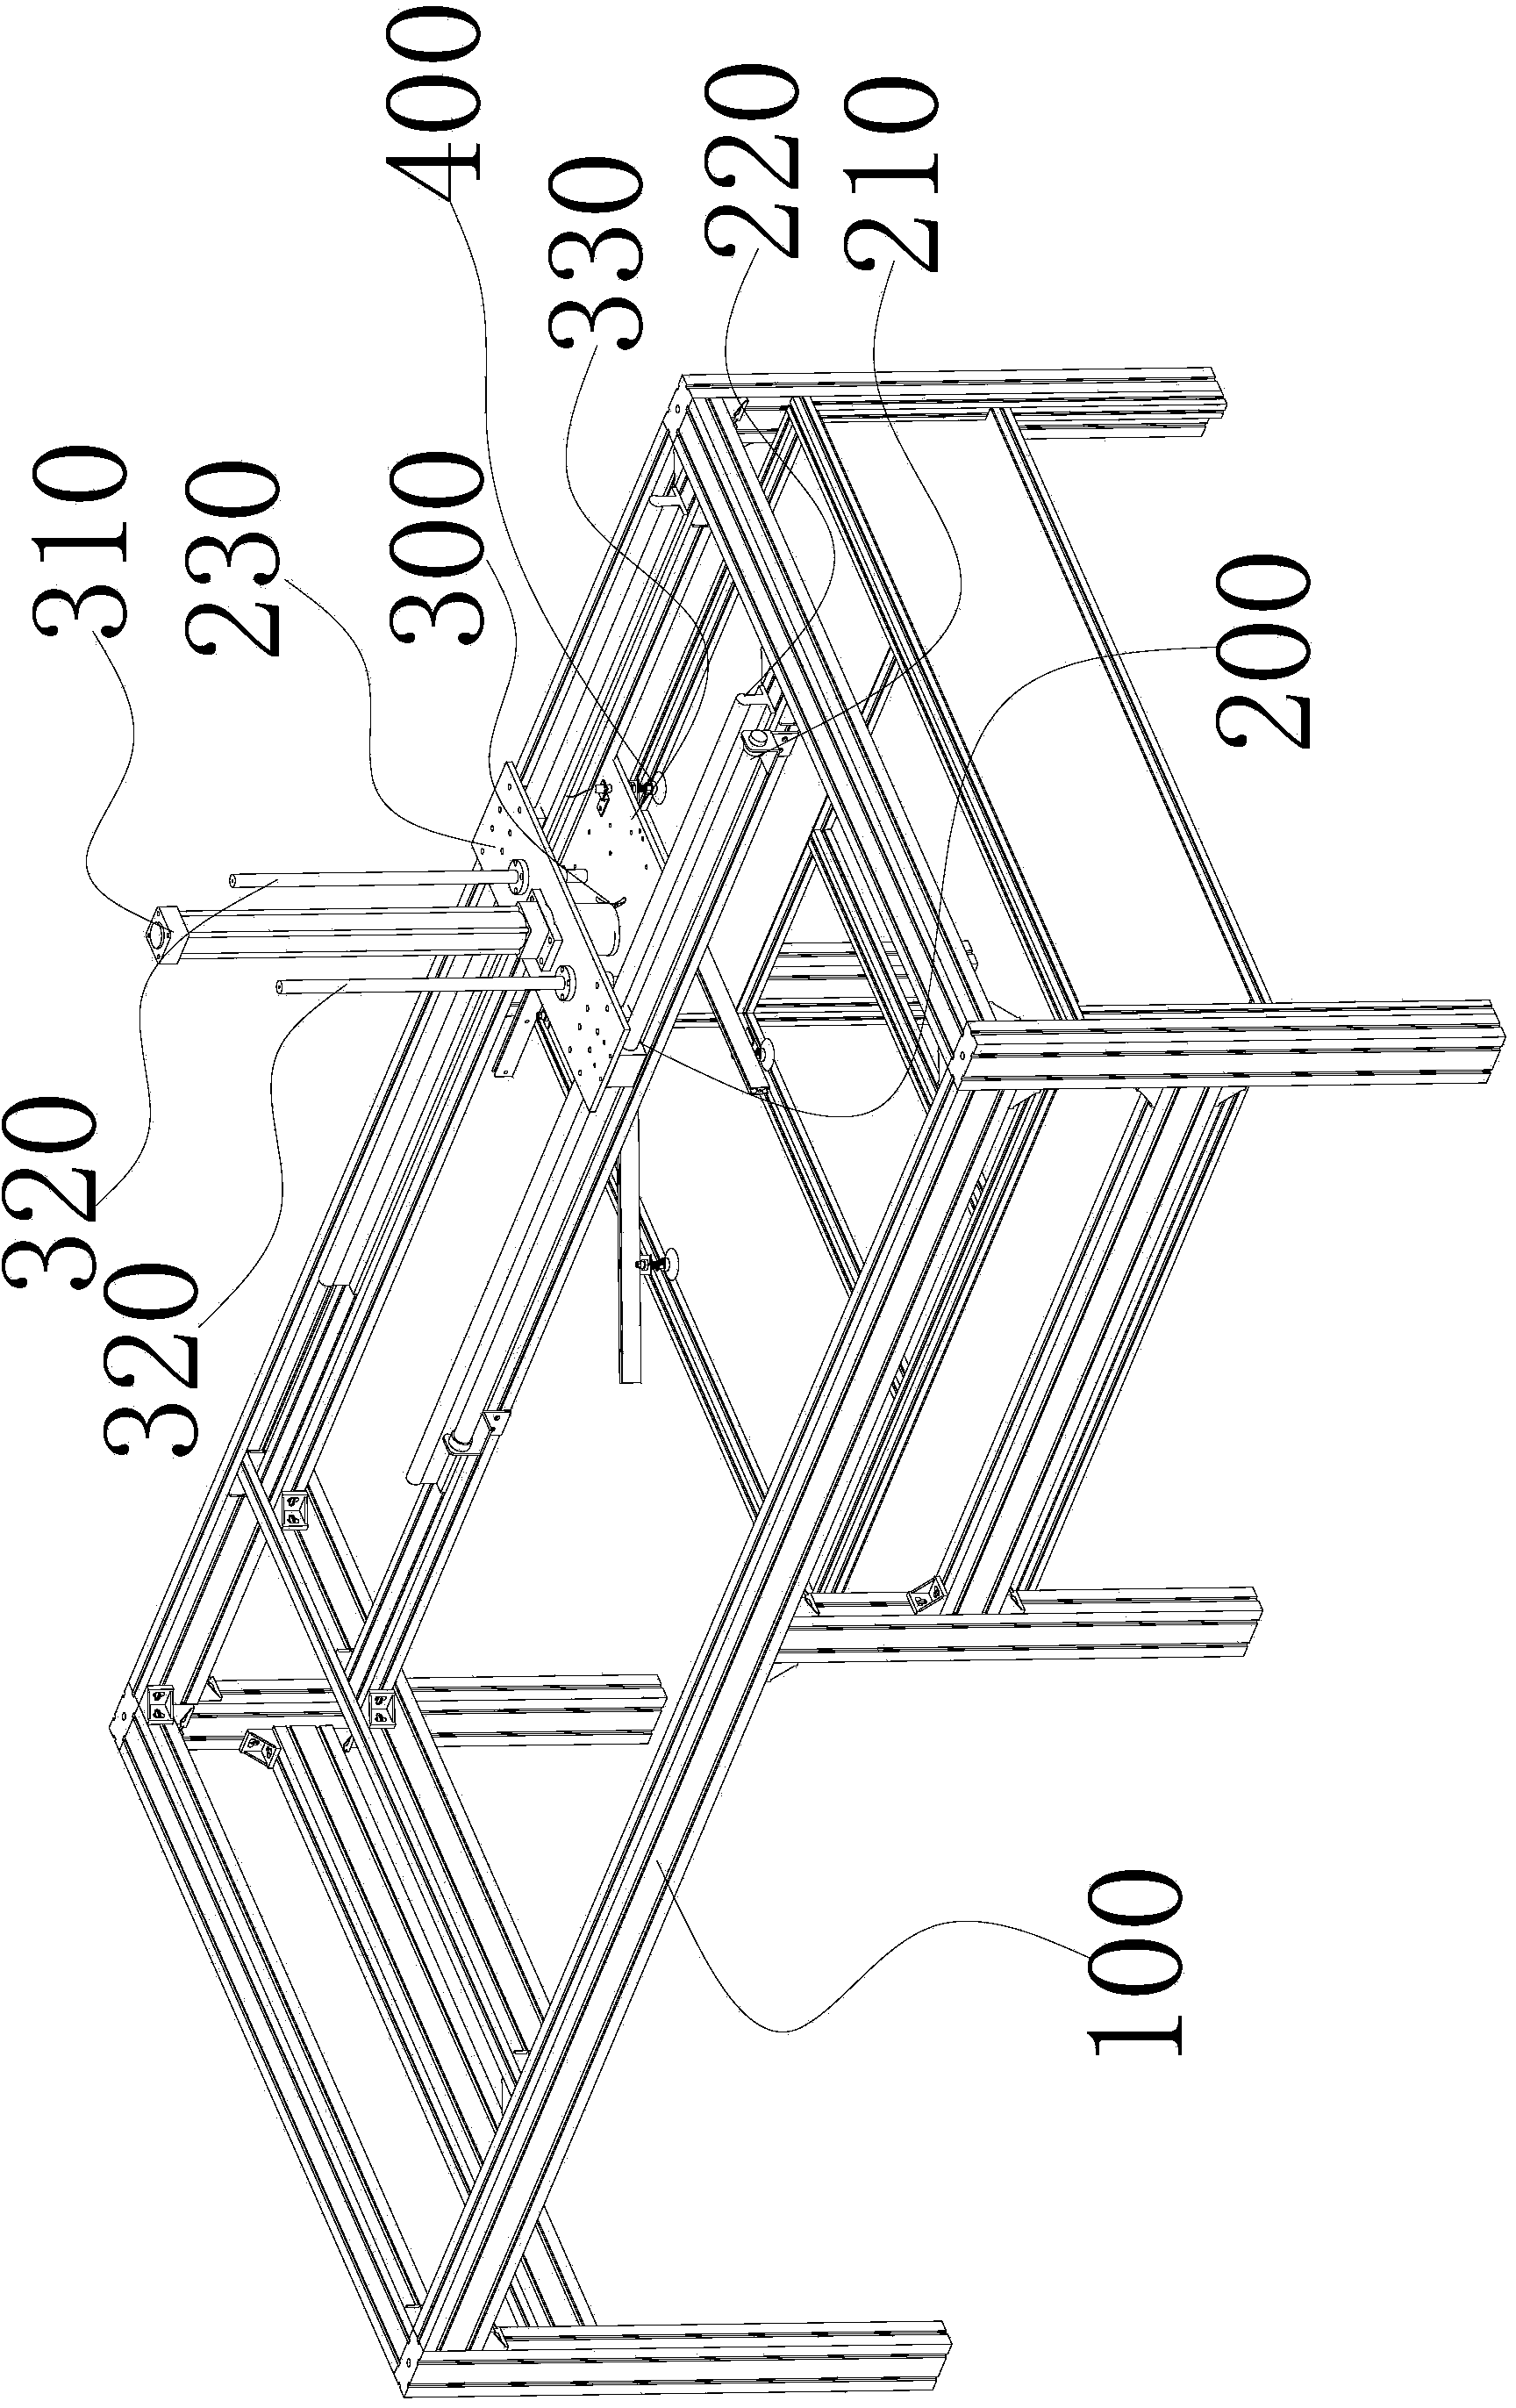 Linear direction carrier for planar object